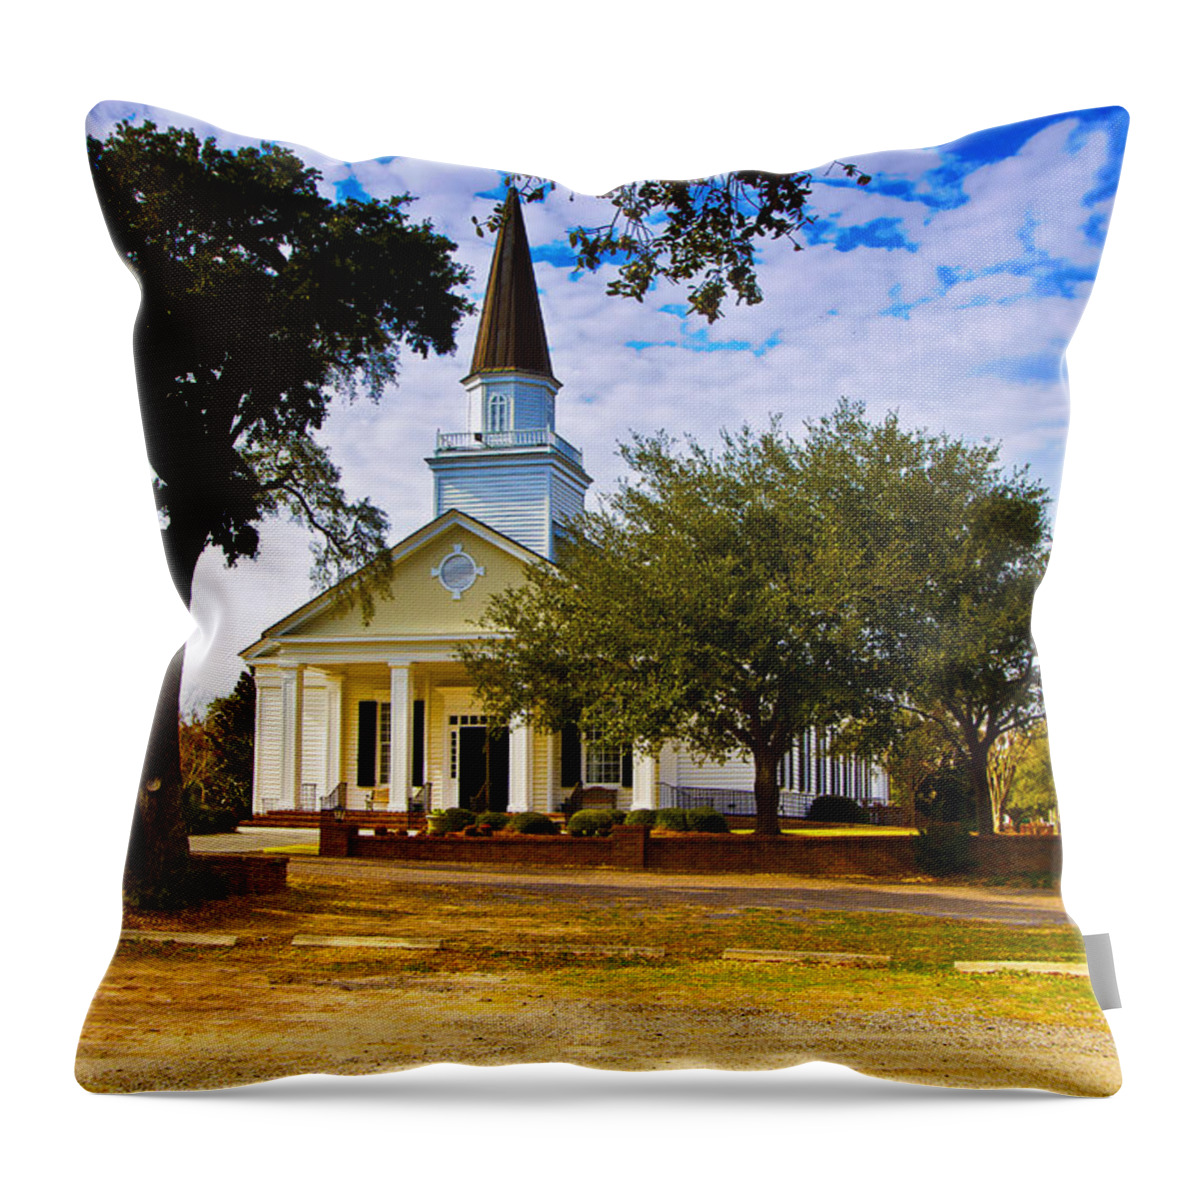 Belin Throw Pillow featuring the photograph Belin United Methodist Church by Bill Barber